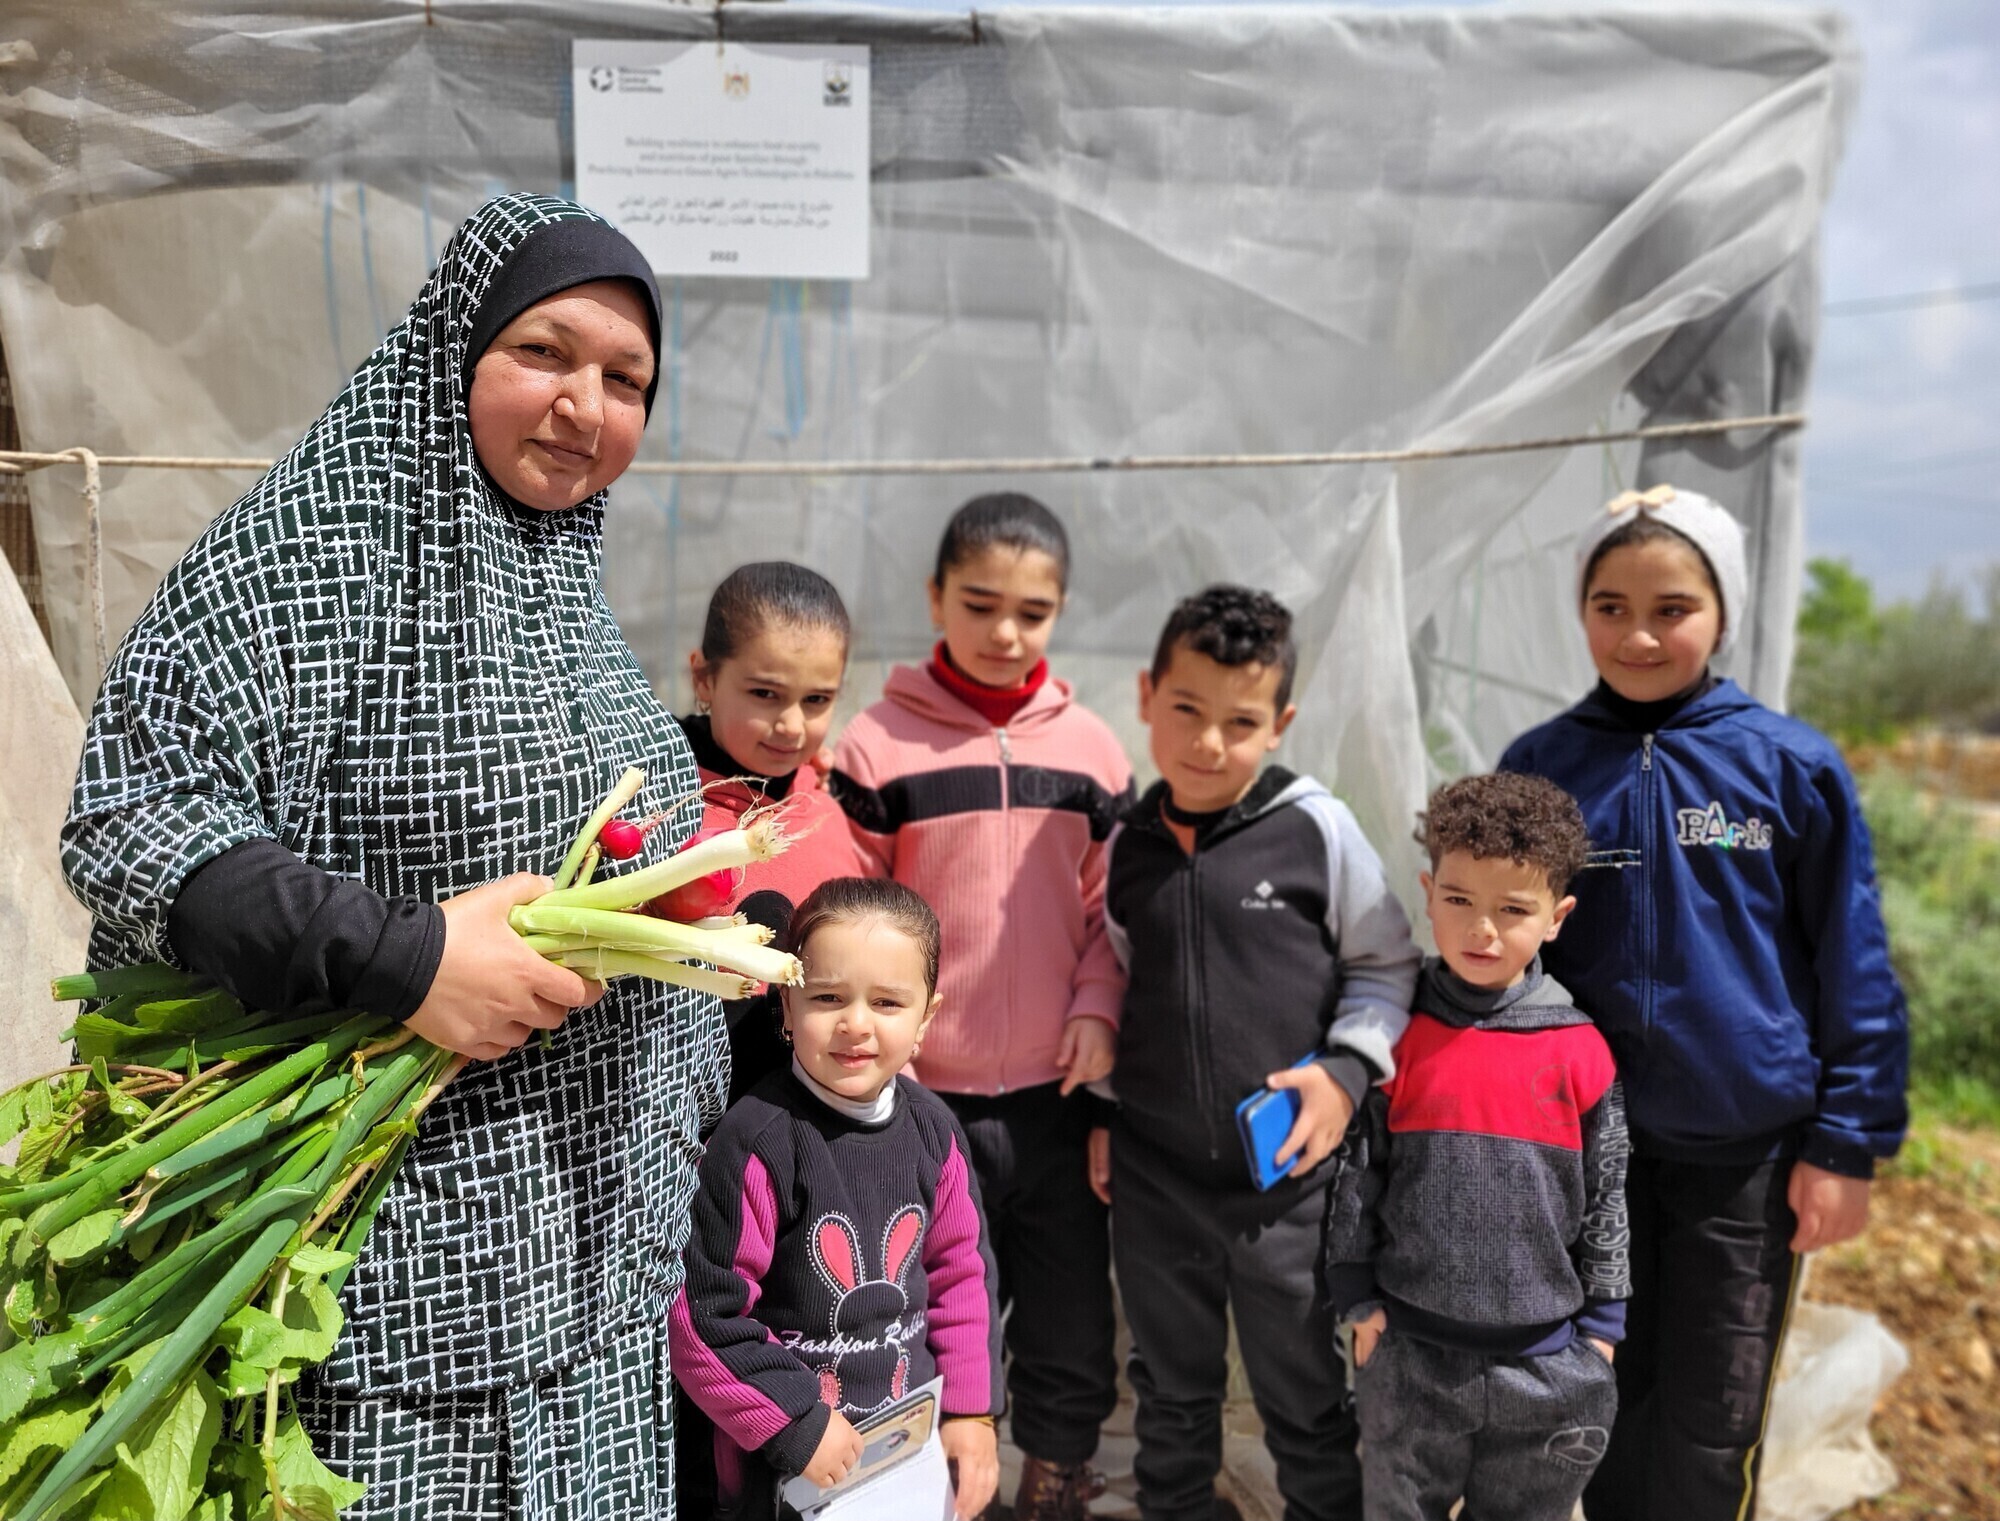 A Palestinian woman stands with six of her grandchildren in a garden. She is holding a bunch of onions